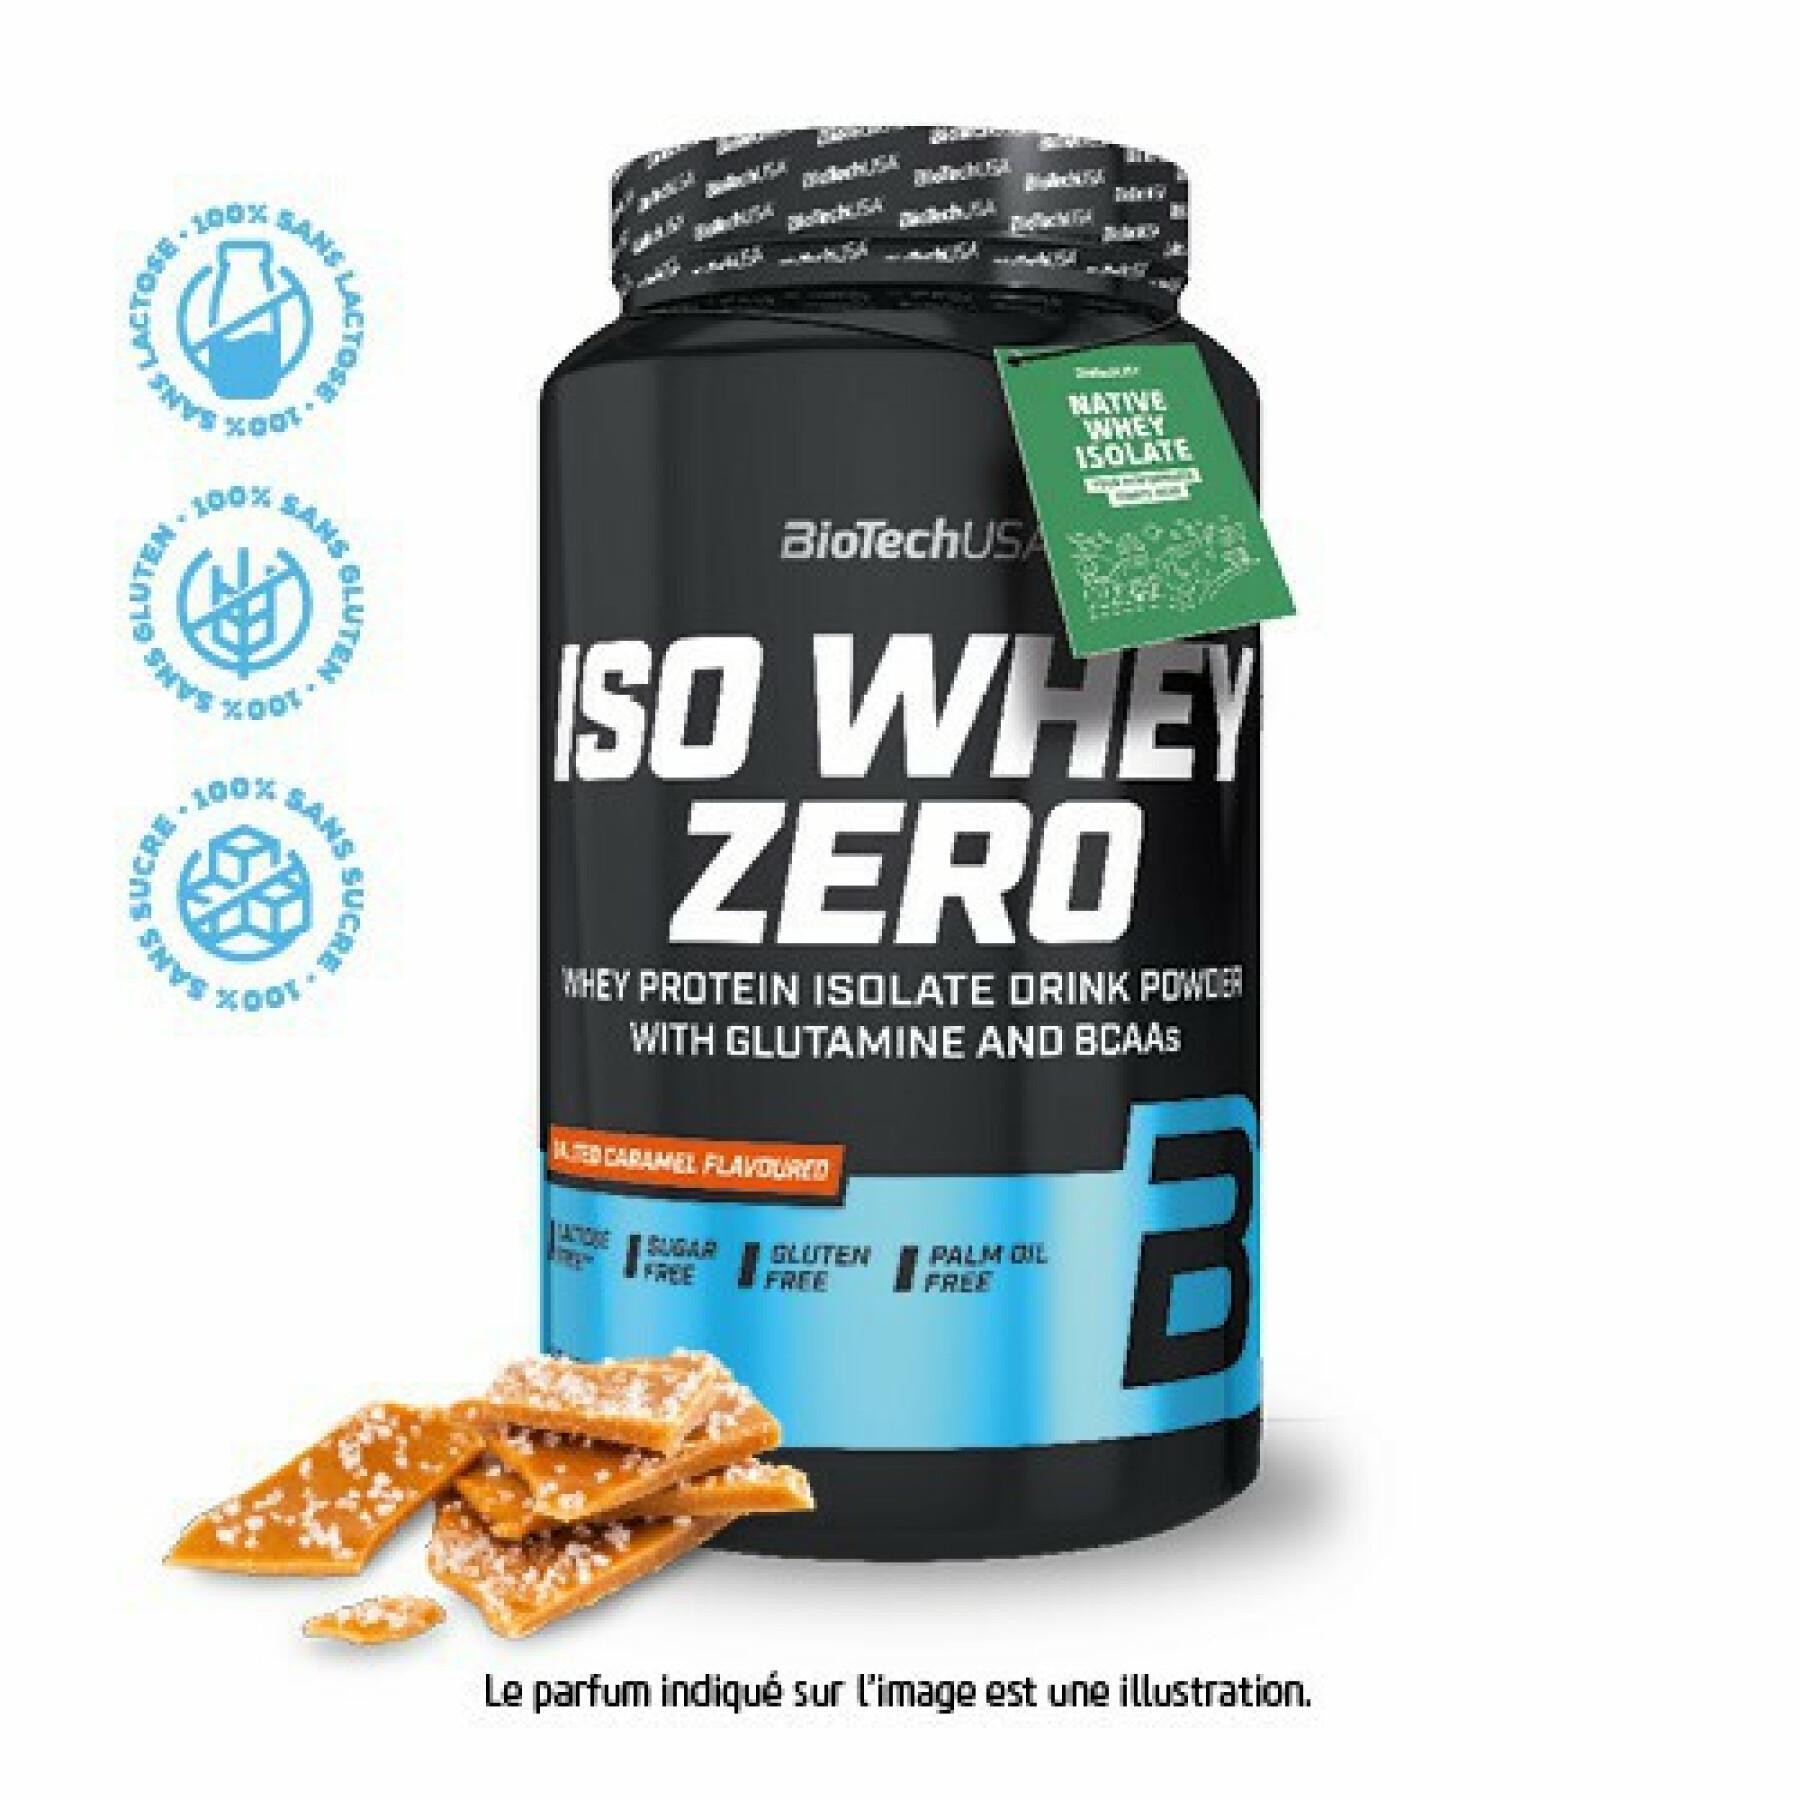 Pack of 6 jars of protein Biotech USA iso whey zero lactose free - Caramel salé 908g